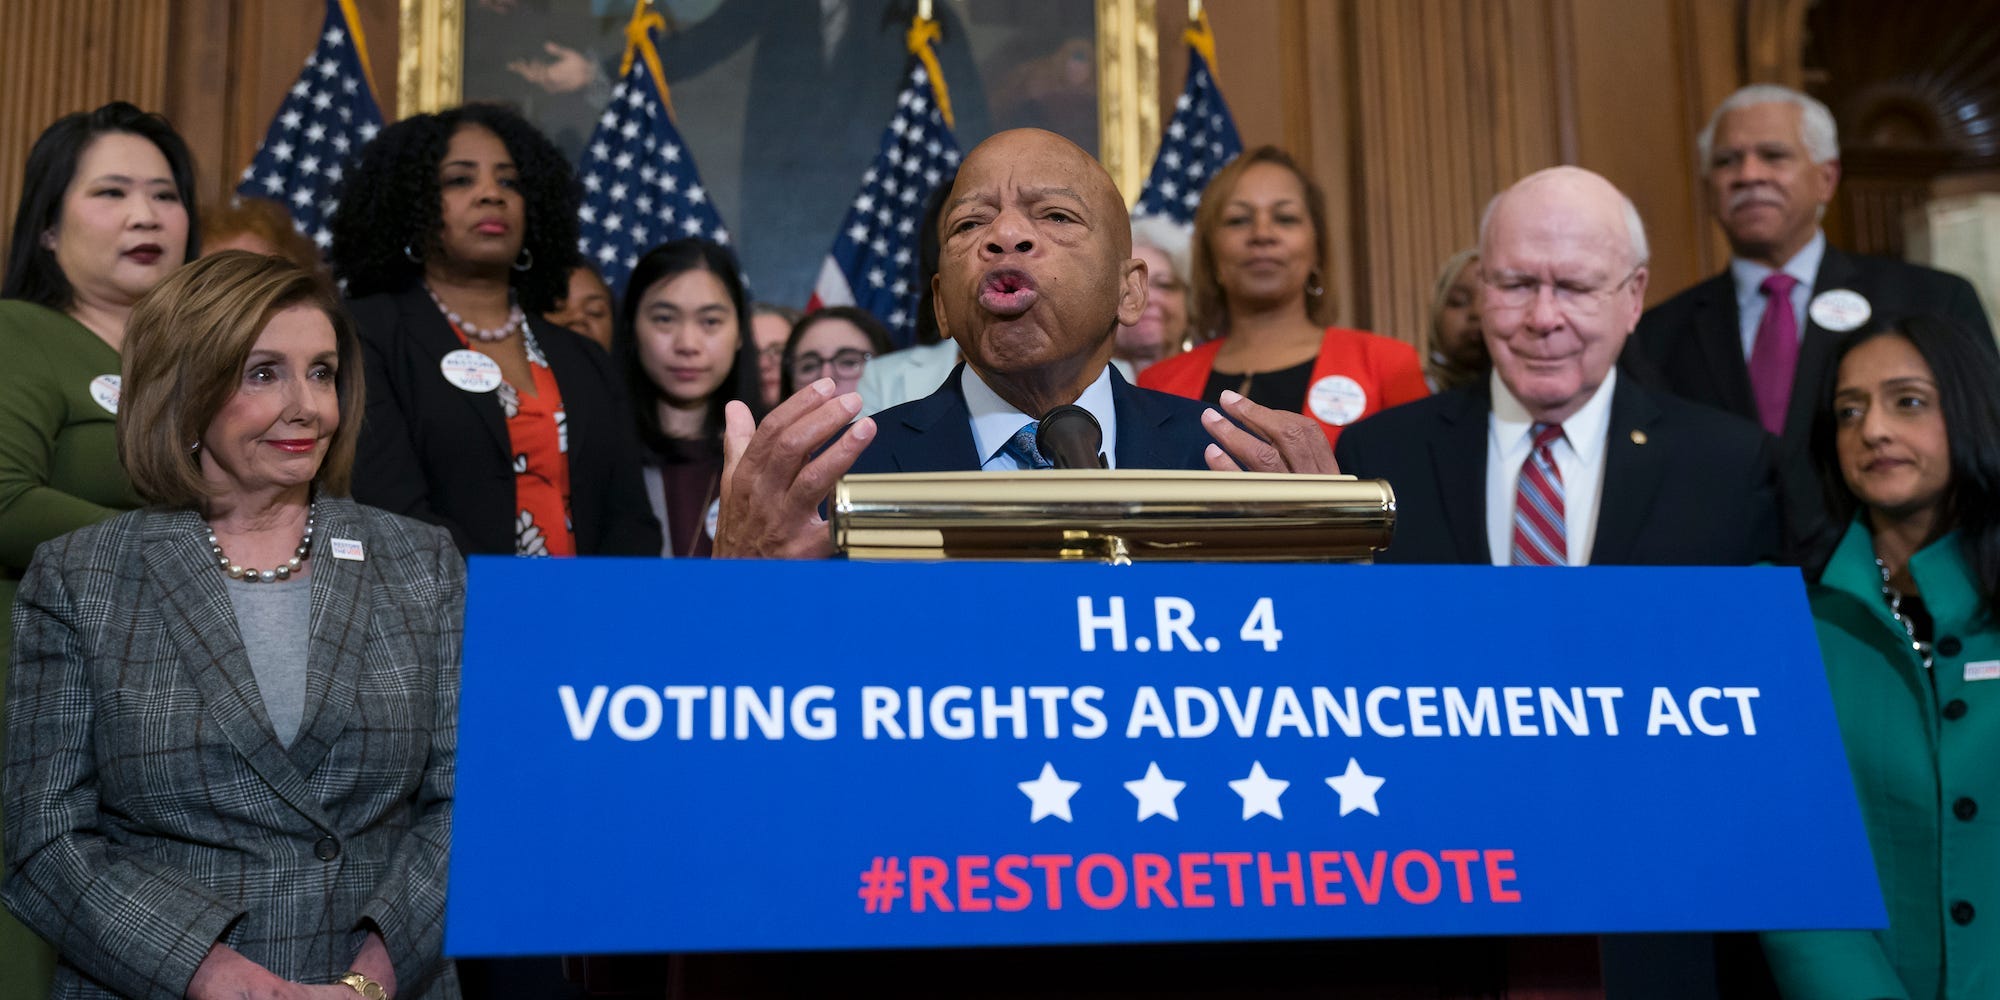 Civil rights leader Rep. John Lewis, D-Ga., flanked by Speaker of the House Nancy Pelosi, D-Calif., left, and Sen. Patrick Leahy, D-Vt., speaks at an event with House Democrats before passing the Voting Rights Advancement Act to eliminate potential state and local voter suppression laws, at the Capitol in Washington, Friday, Dec. 6, 2019.